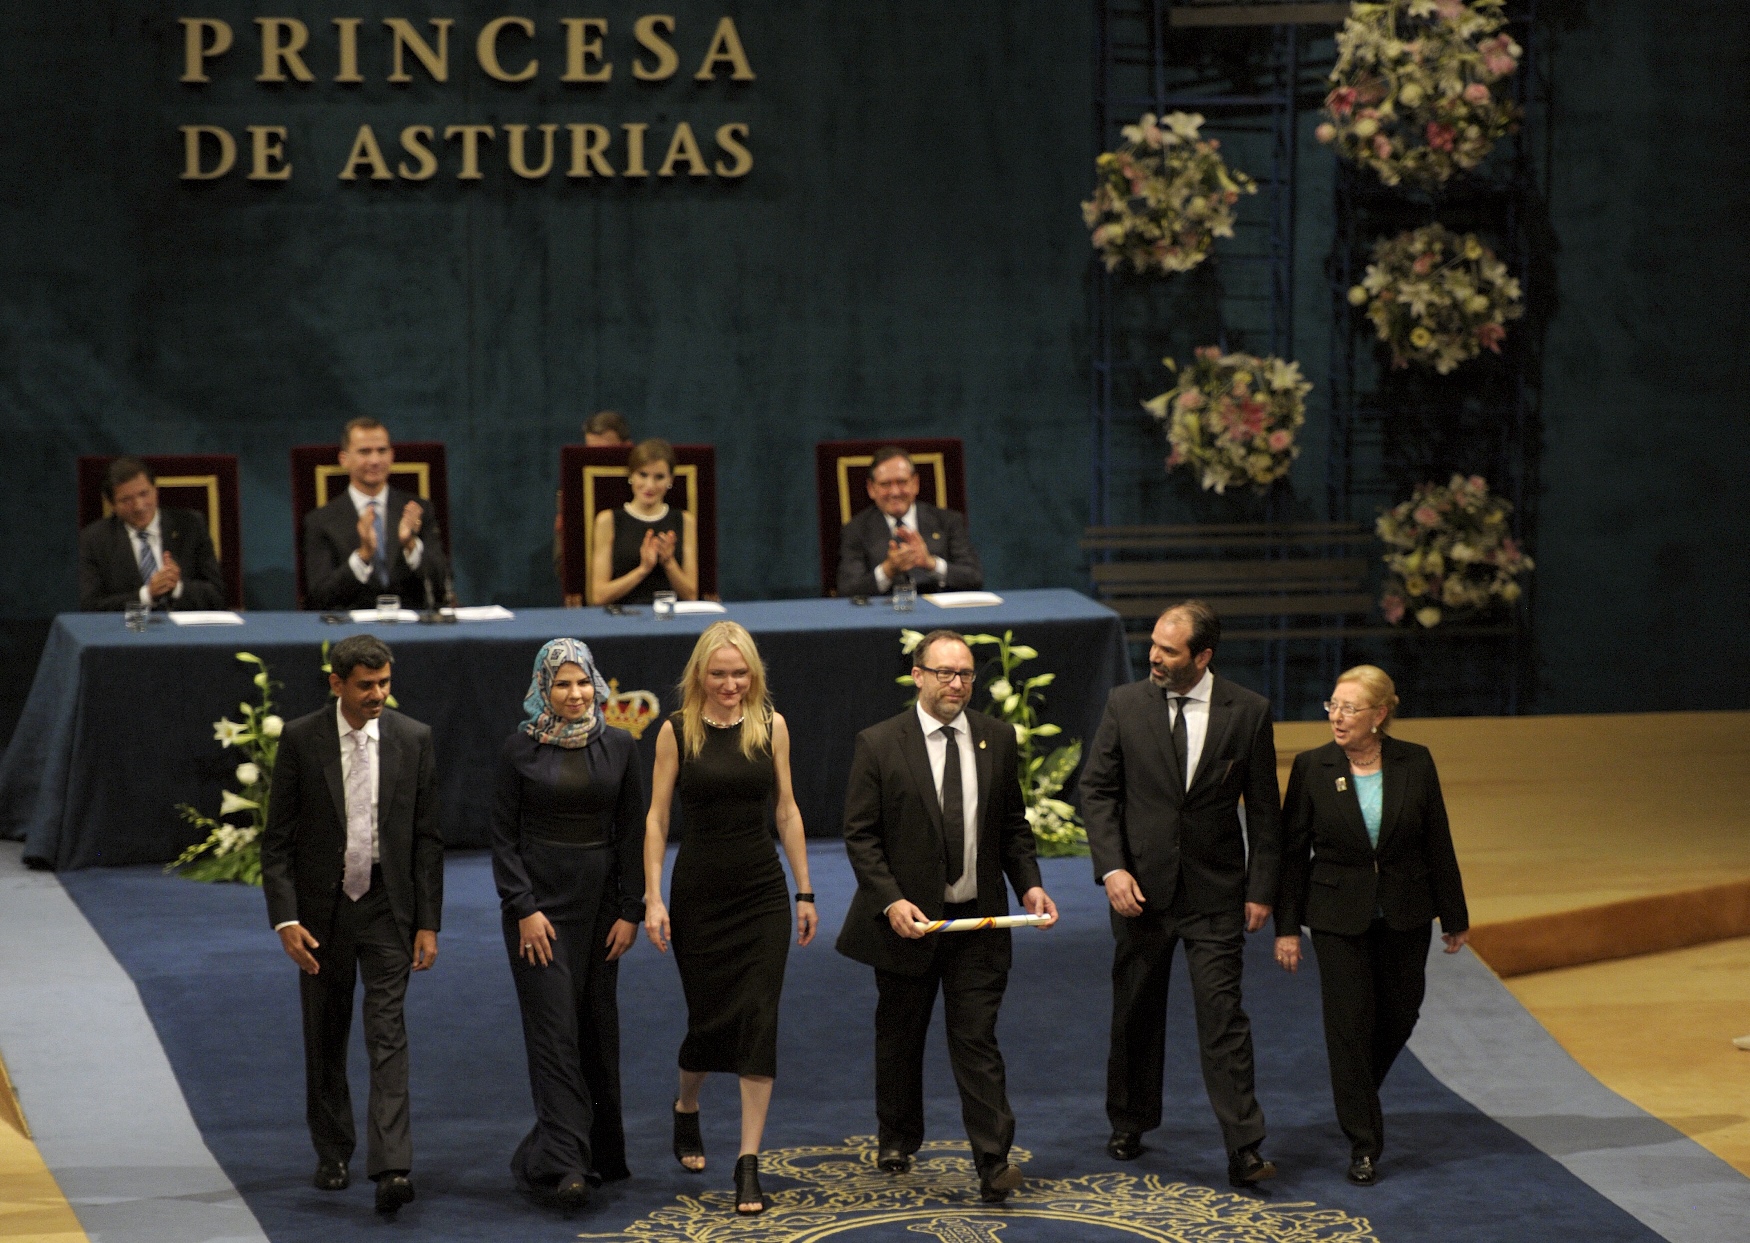 l r jeevan jose ravan al taie lila tretikov jimmy wales patricio llorente lourdes cardenal of wikipedia acknowledge applause after receiving the 2015 princess of asturias award for international cooperation from spain 039 s king felipe during a ceremony at campoamor theatre in oviedo northern spain october 23 2015 photo reuters